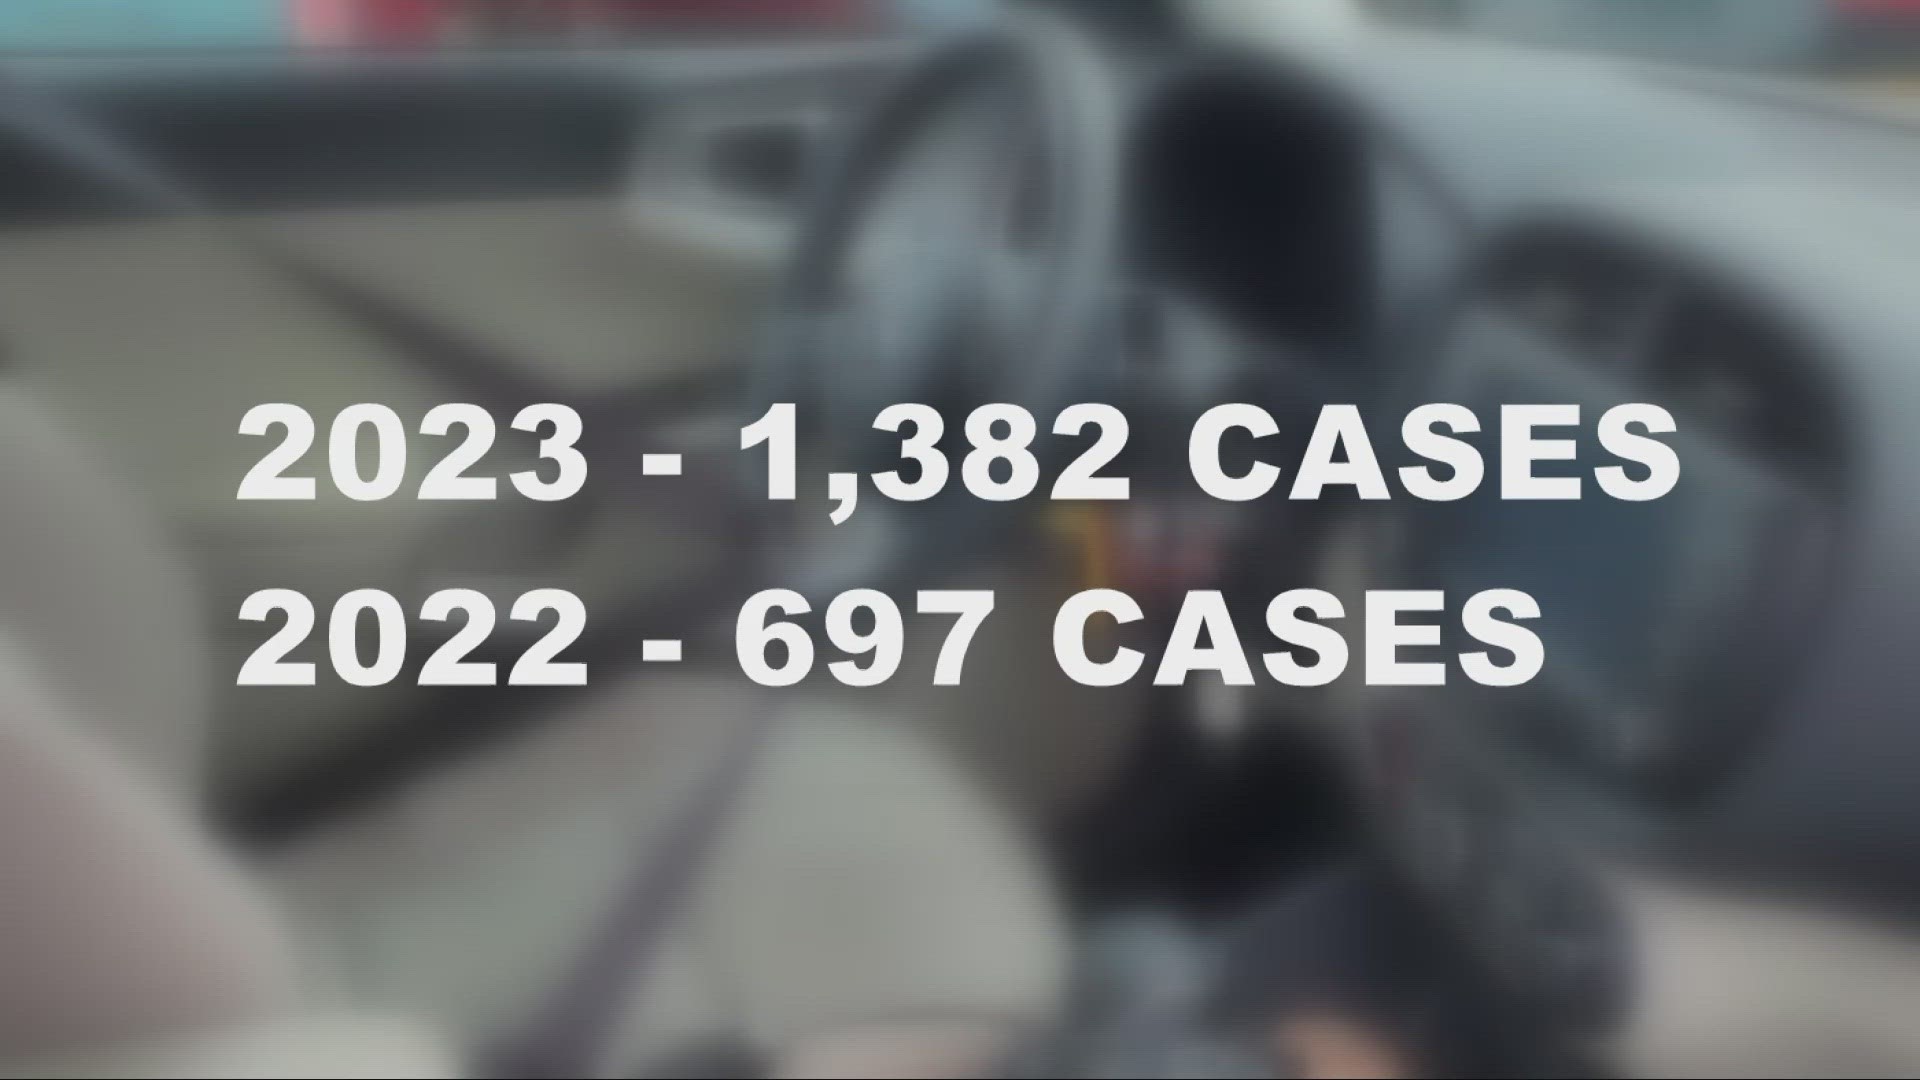 More than 1,300 cases of grand theft of a motor vehicle have been reported to the Cleveland Division of Police in 2023, compared to just 697 at this time last year.